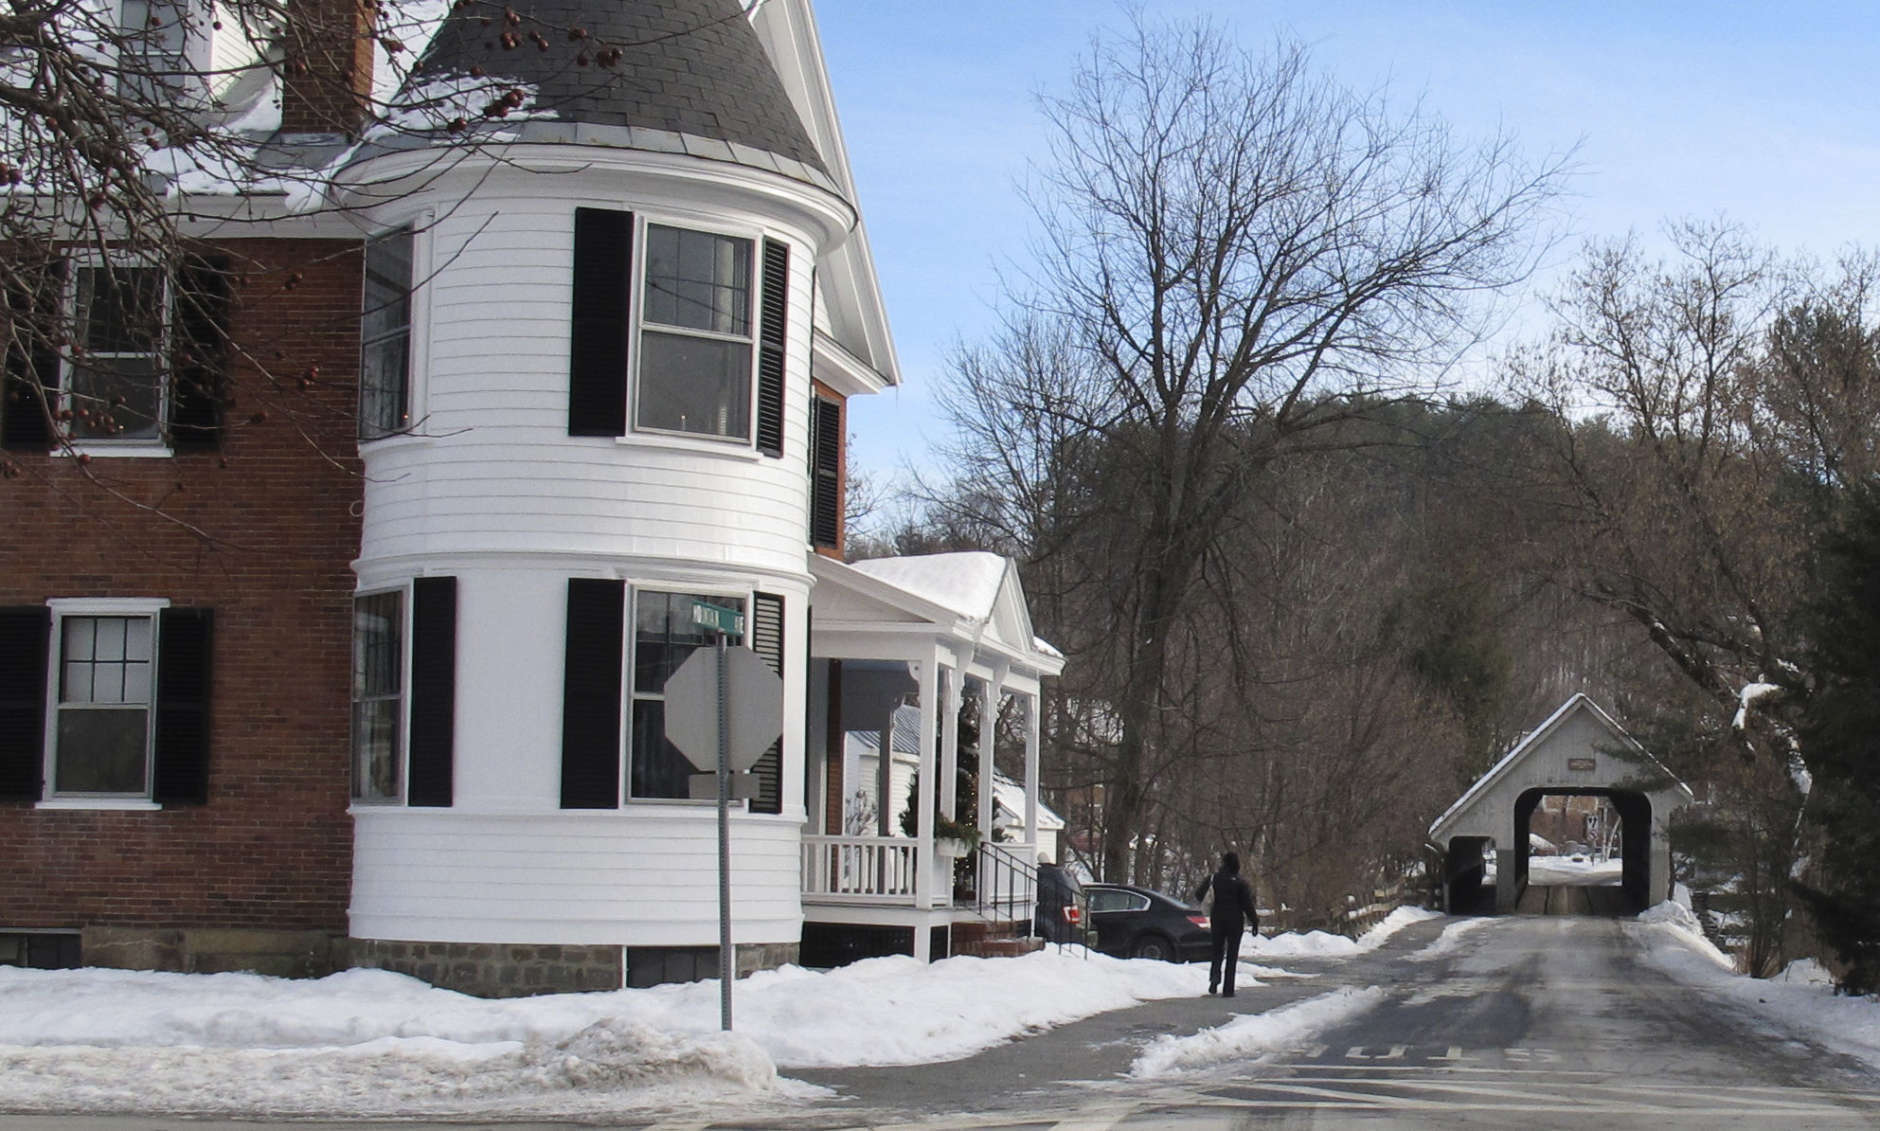 In this photo taken Dec. 20, 2016, a person passes a home with window shutters while walking towards a covered bridge in Woodstock, Vt. The village of Woodstock is cracking down on homeowners who are refusing to keep shutters on their homes. Officials say the loss of shutters would hurt the village's historic character. (AP Photo/Wilson Ring)